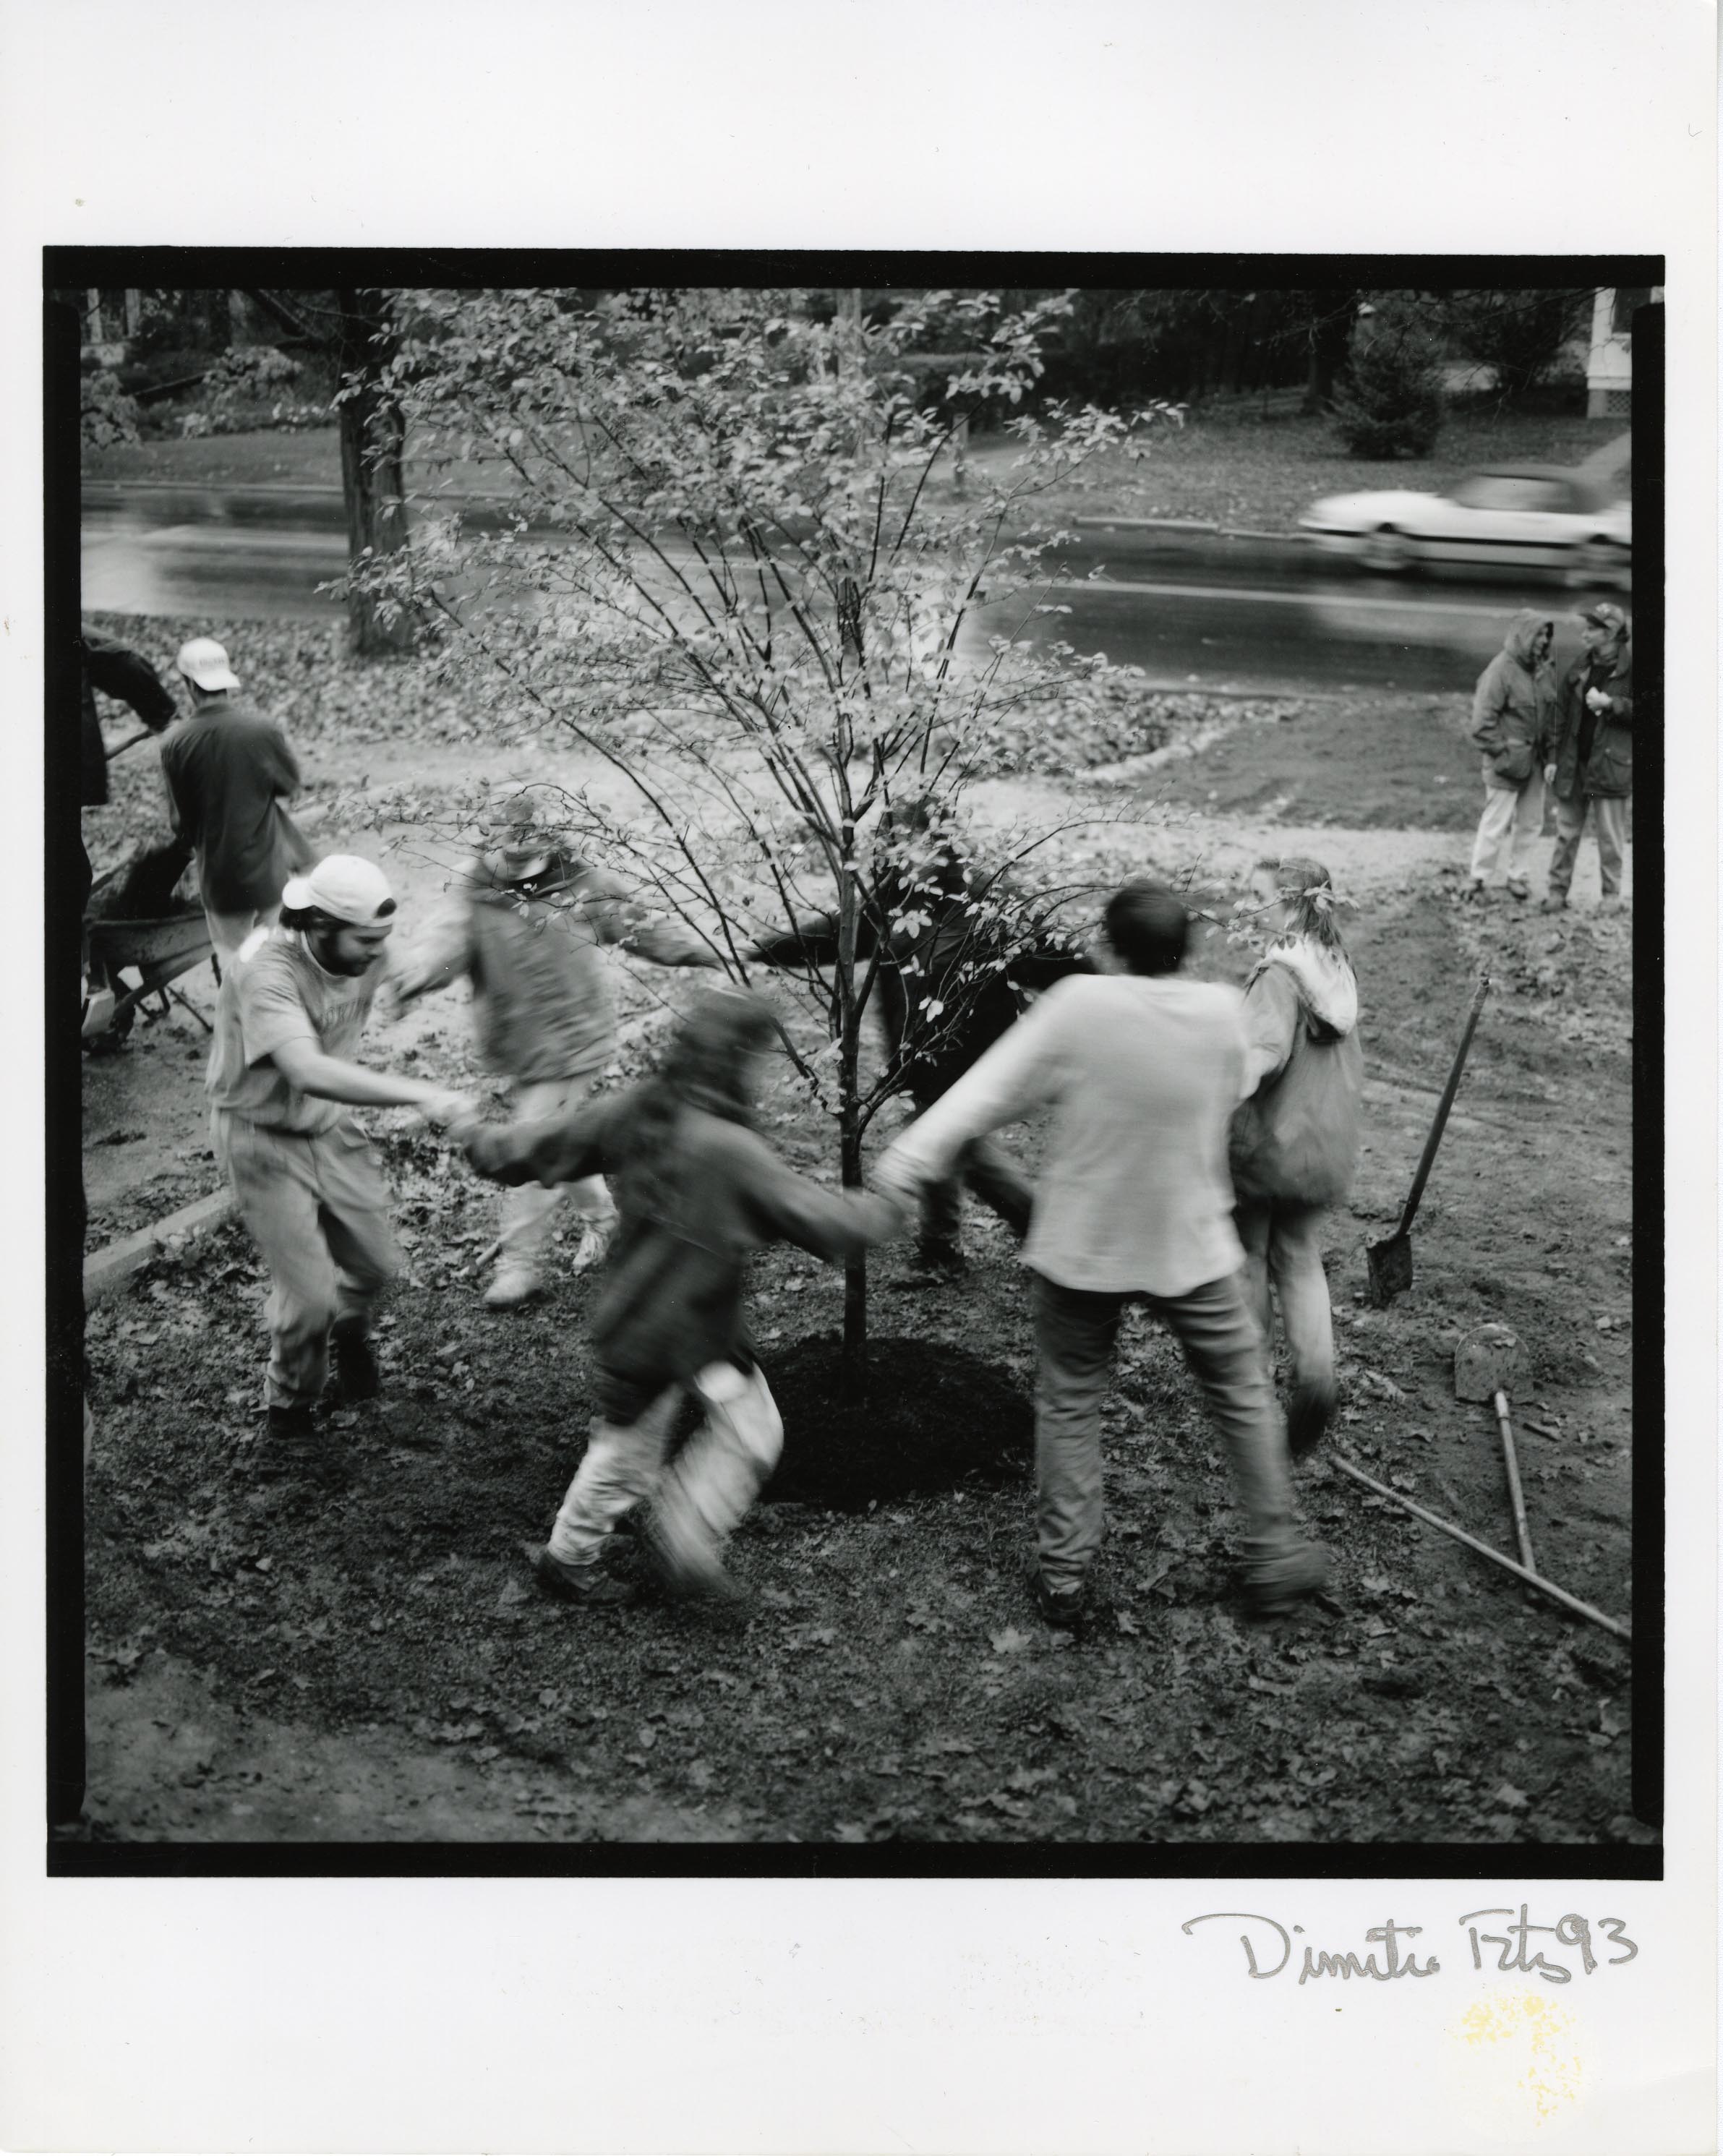 Arbor Day photo from WAC Archive